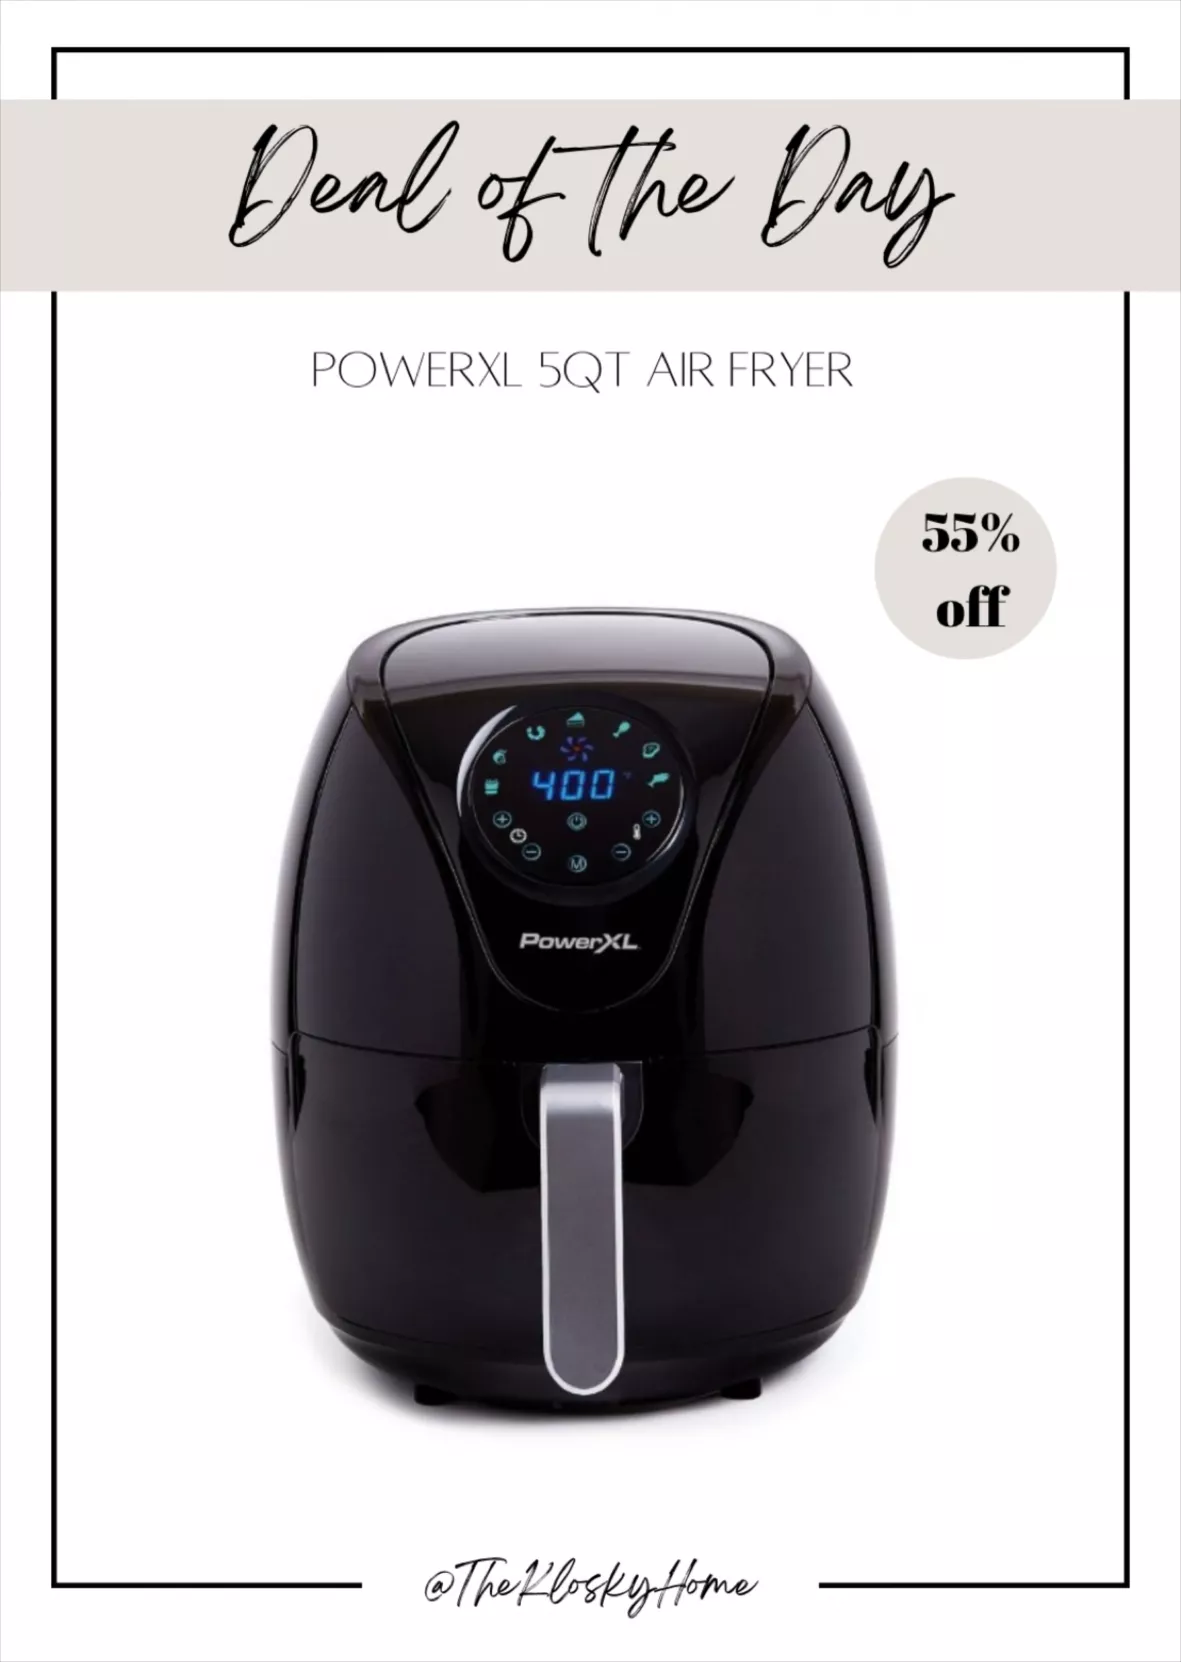 The PowerXL Air Fryer Went Viral on TikTok, and It's on